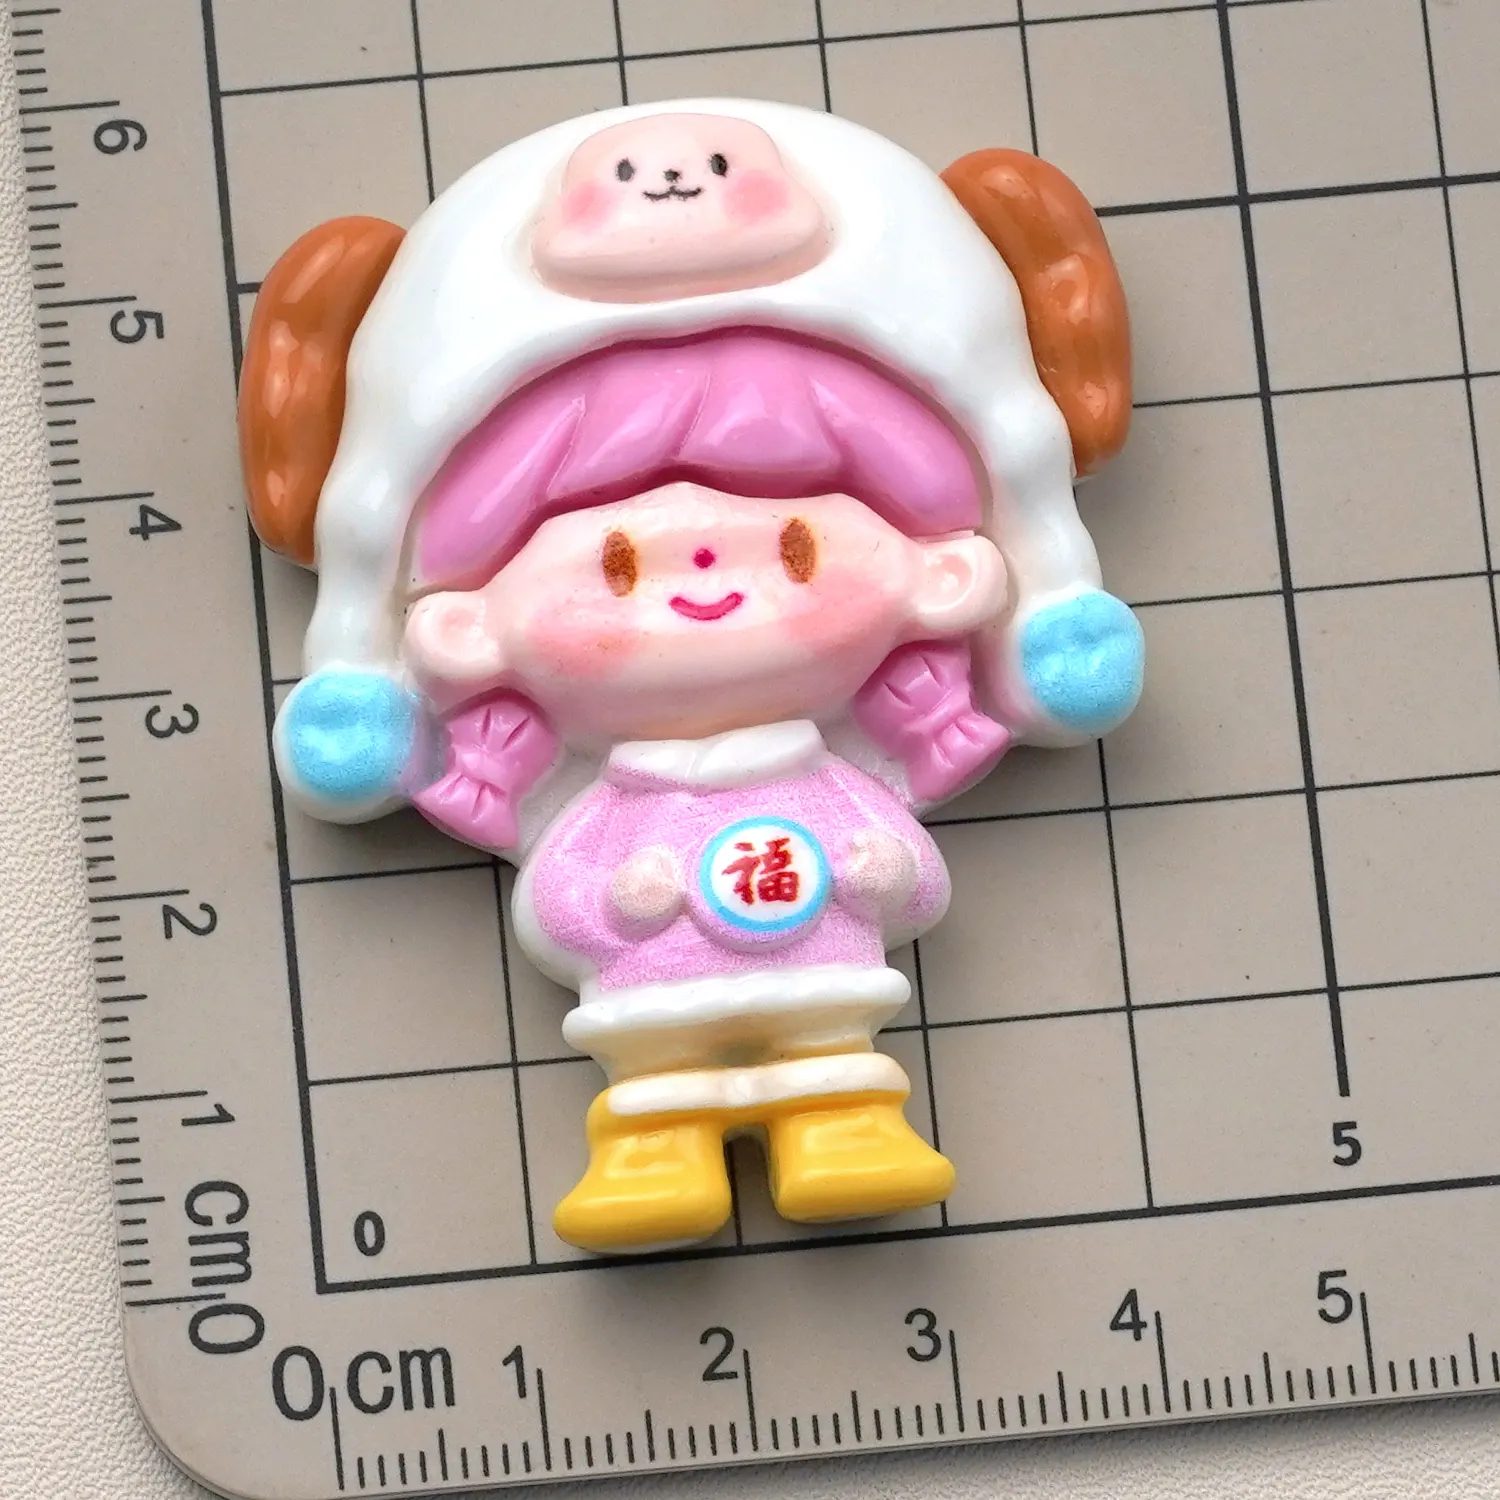 Hot Selling Kawaii Animal Cartoon Flatback Cabochon Resin Accessories For Handmade Crafts DIY Home Decoration Accessories